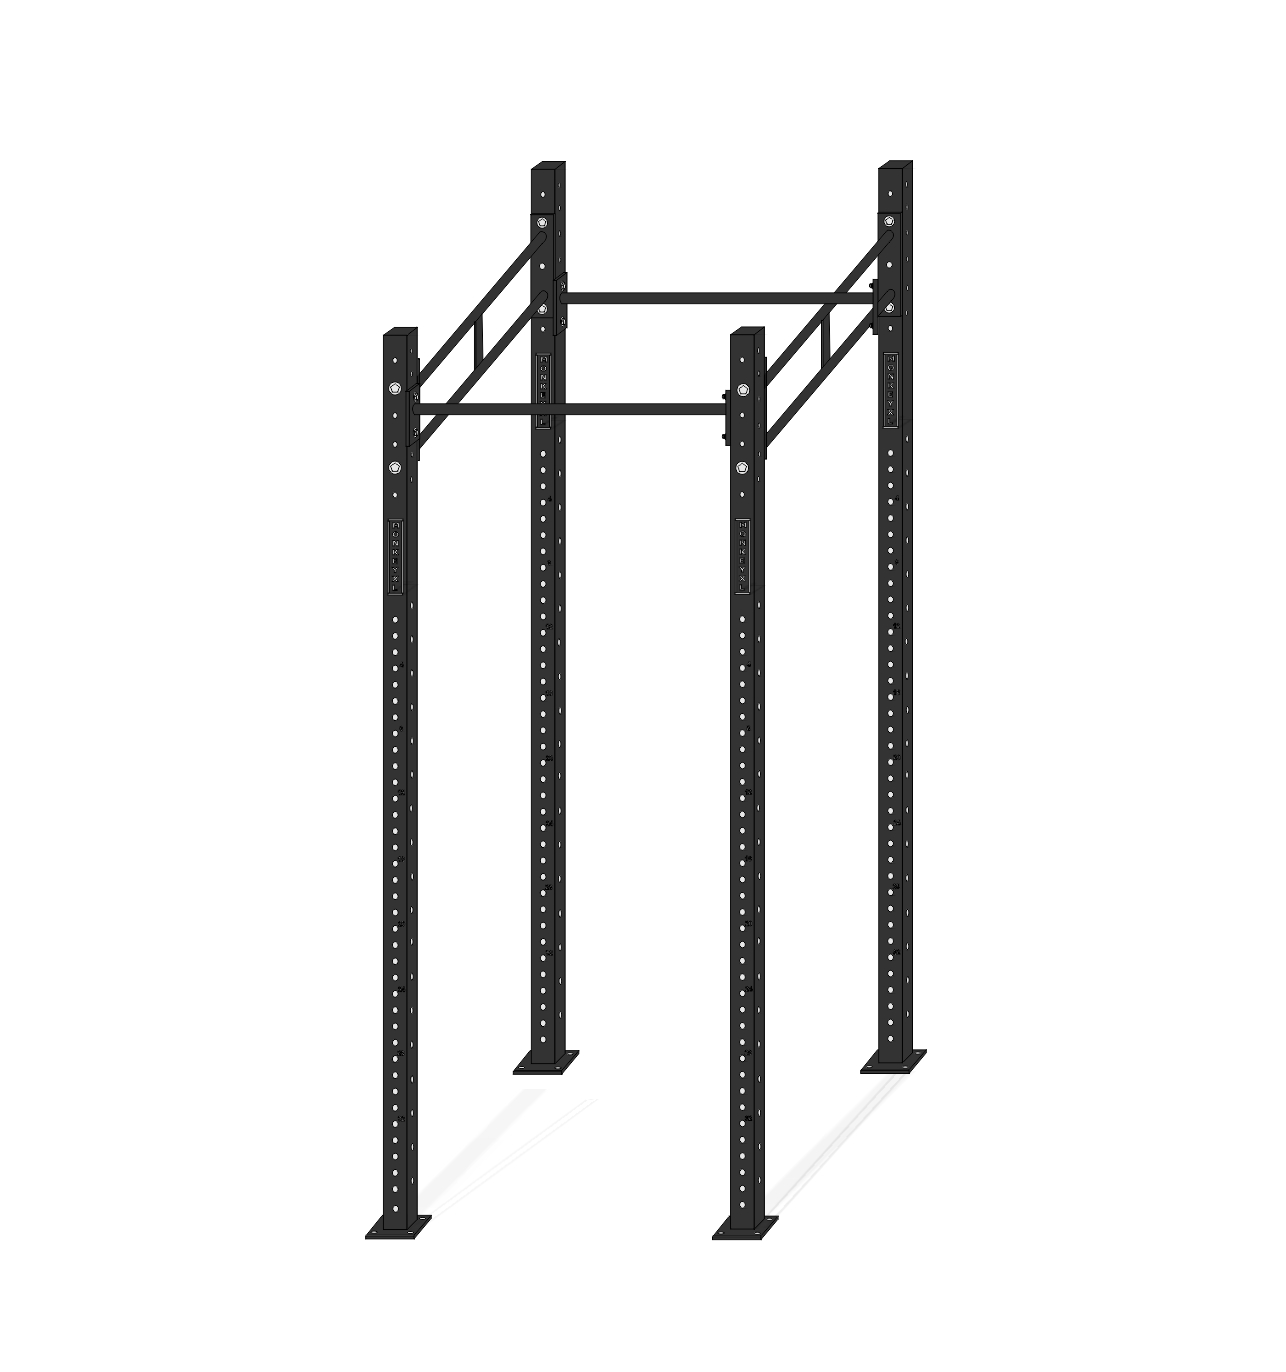 Compact, Pro fitness crossfit rack